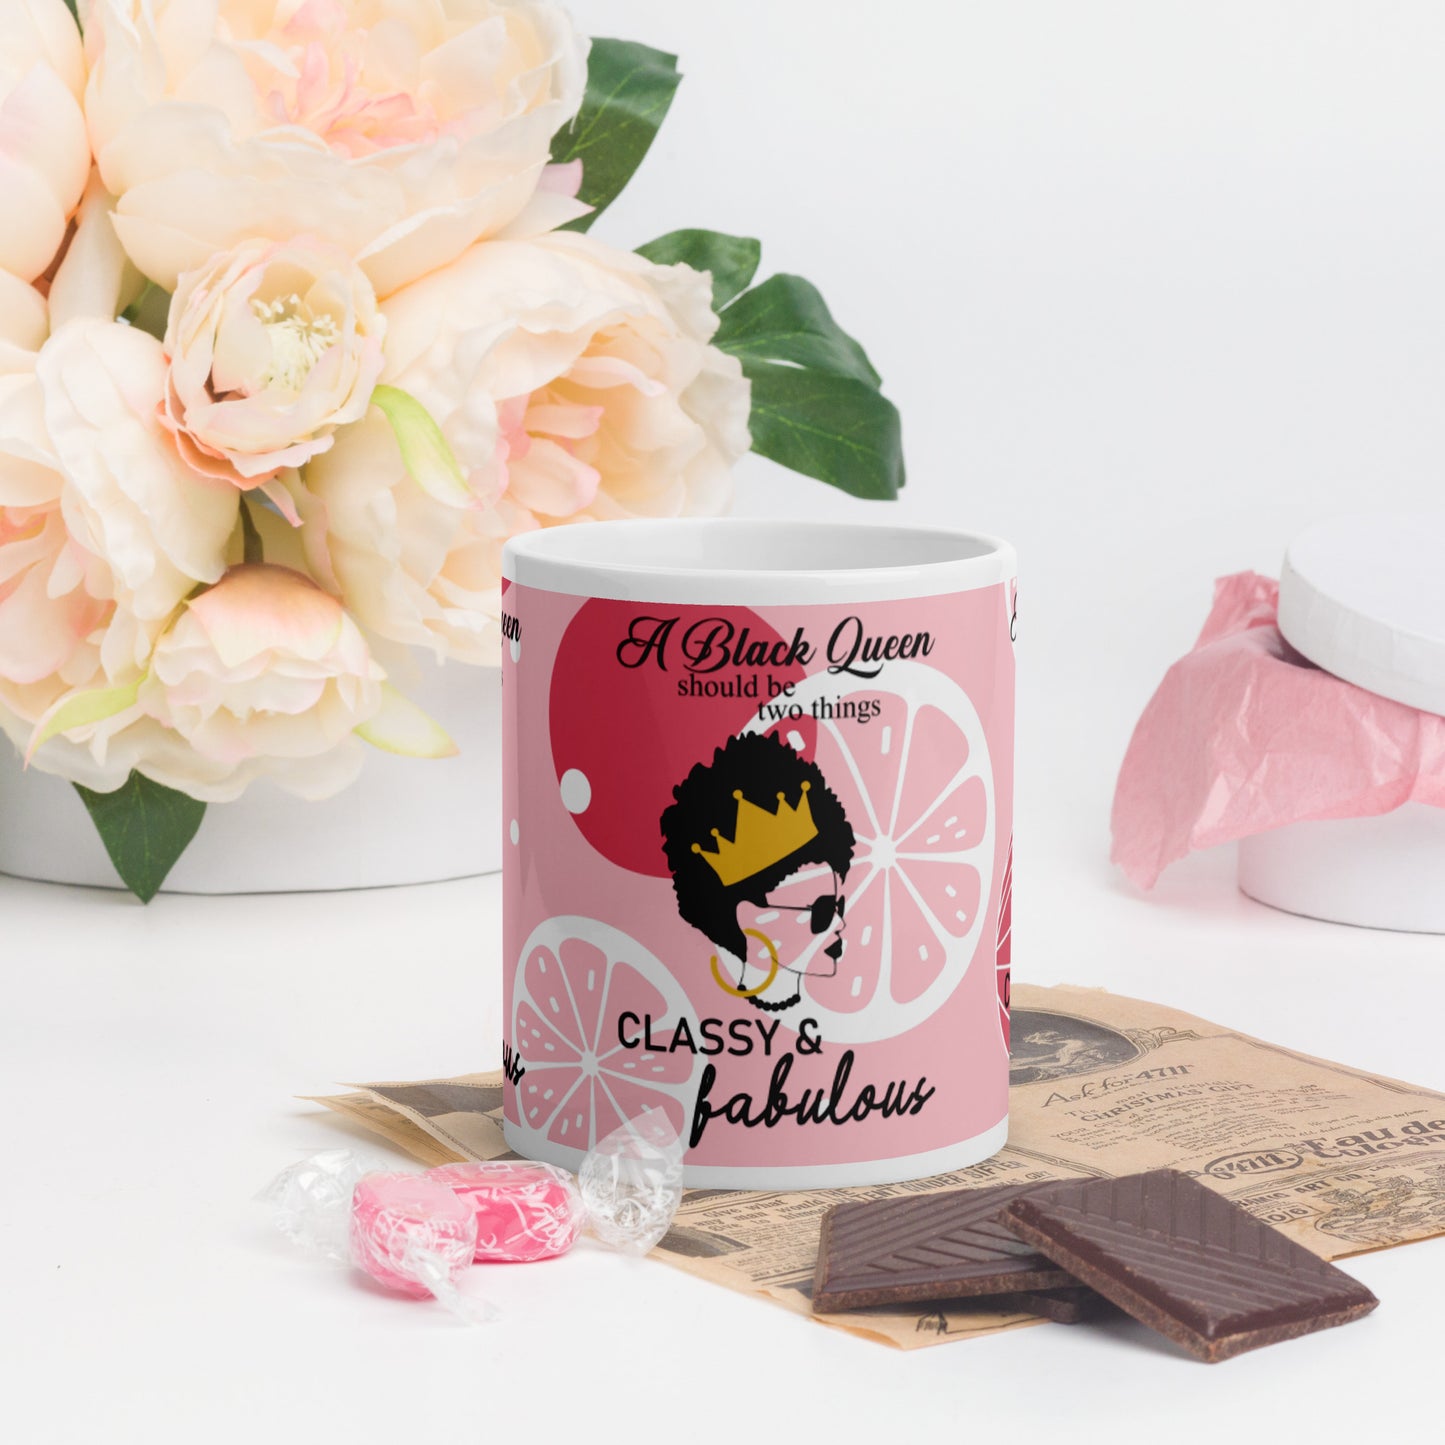 FABULOUS AND CLASSY BLACK QUEEN- White glossy mug